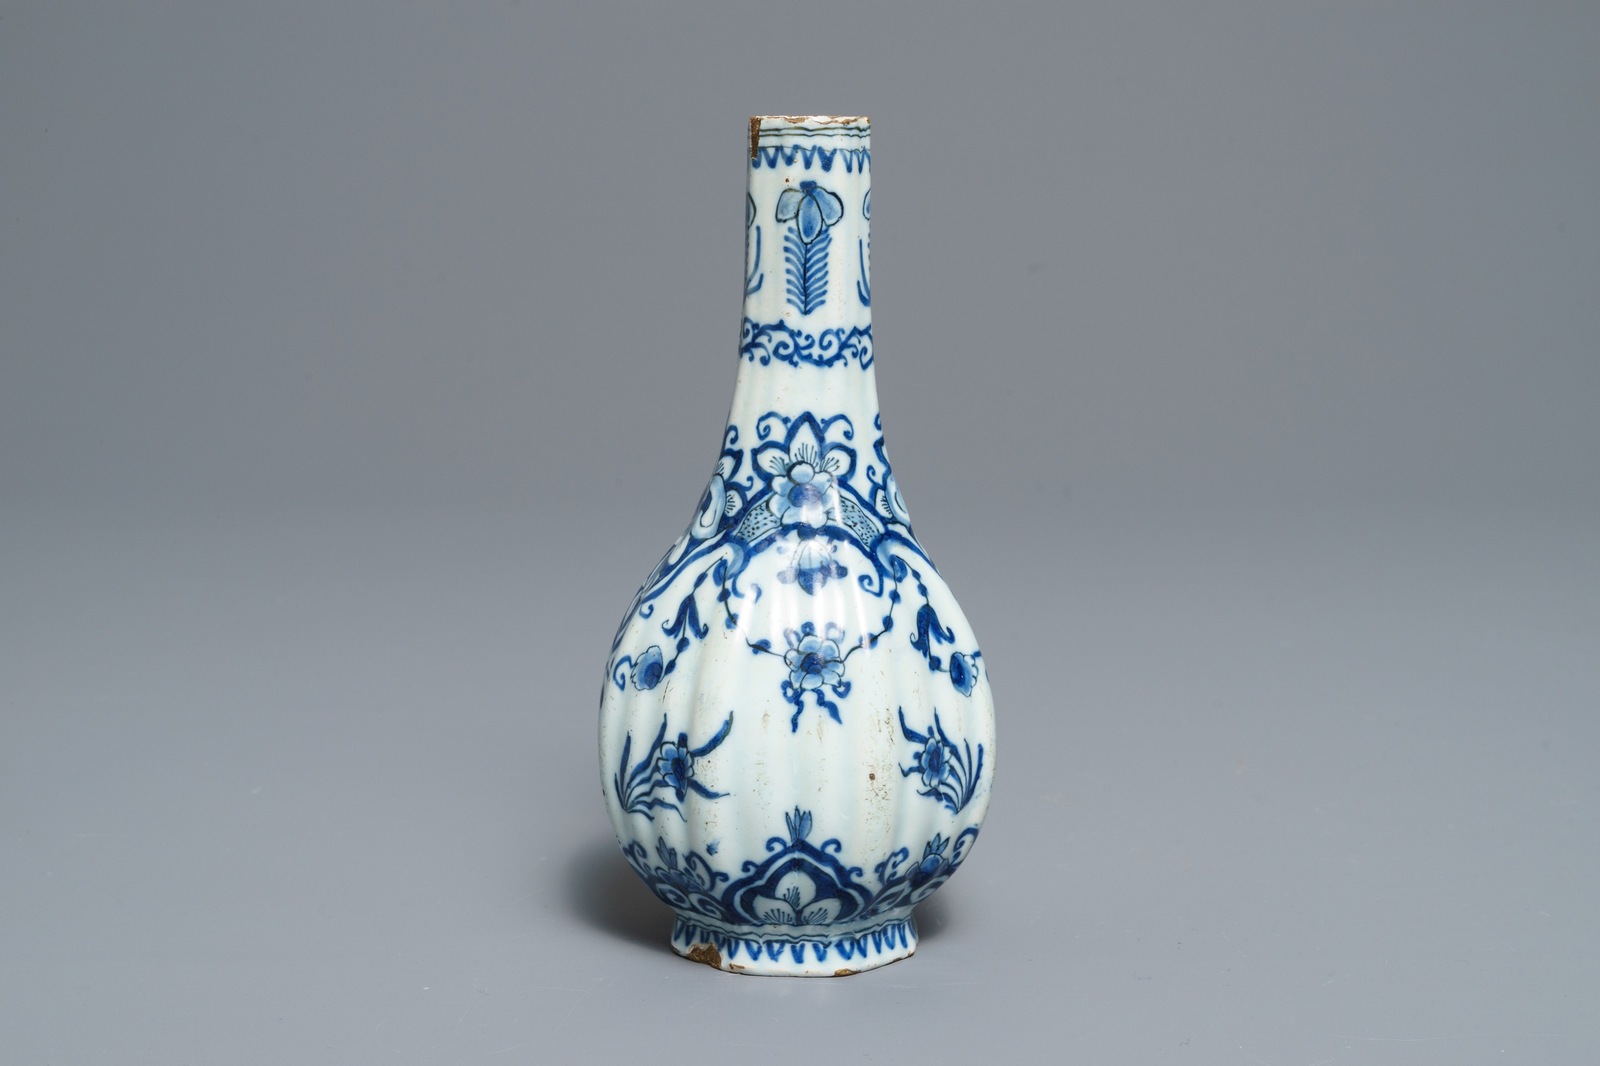 Two Dutch Delft blue and white chargers, an oval dish and a vase, 18th C. - Image 10 of 13